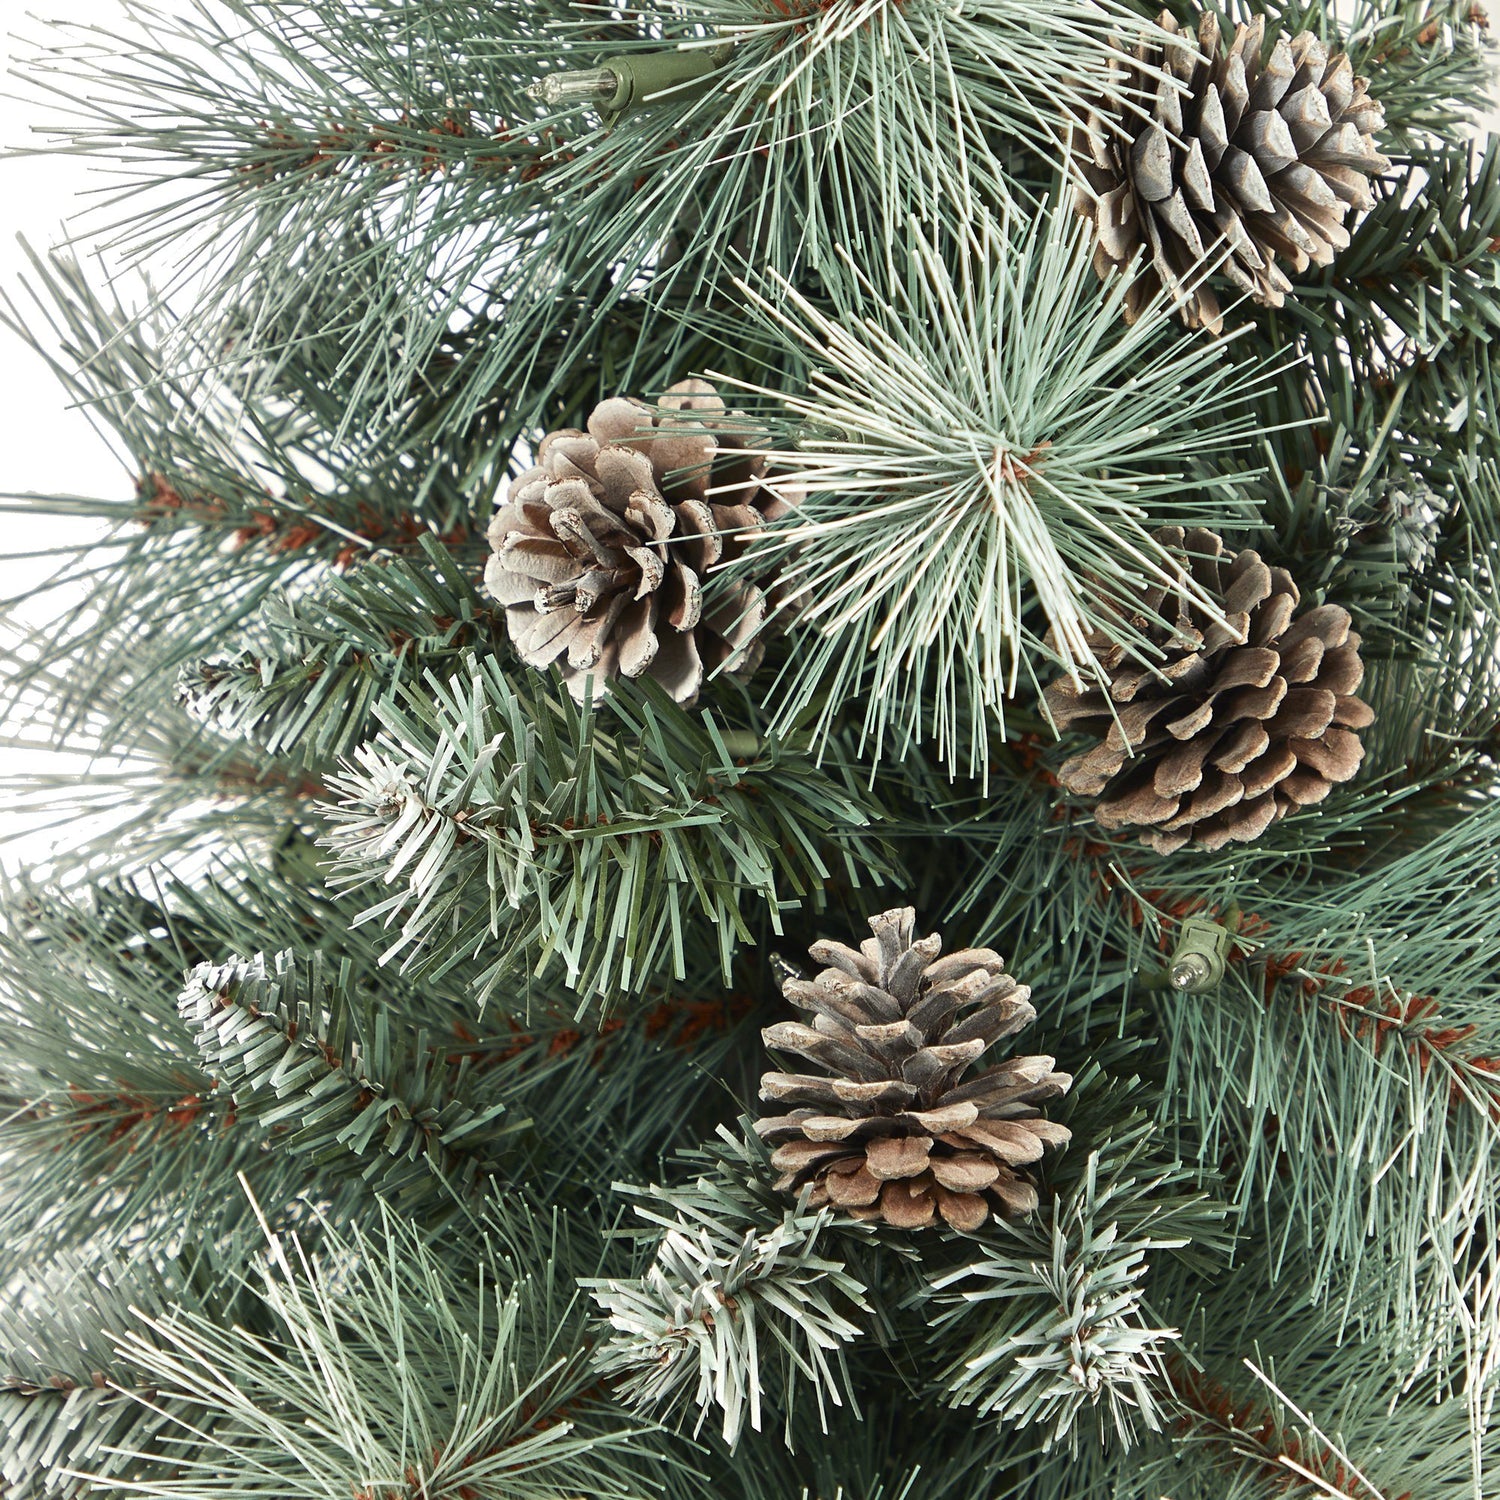 3.5’ Frosted Tip British Columbia Mountain Pine Artificial Christmas Tree with 50 Clear Lights, Pine Cones and 112 Bendable Branches in Metal Planter